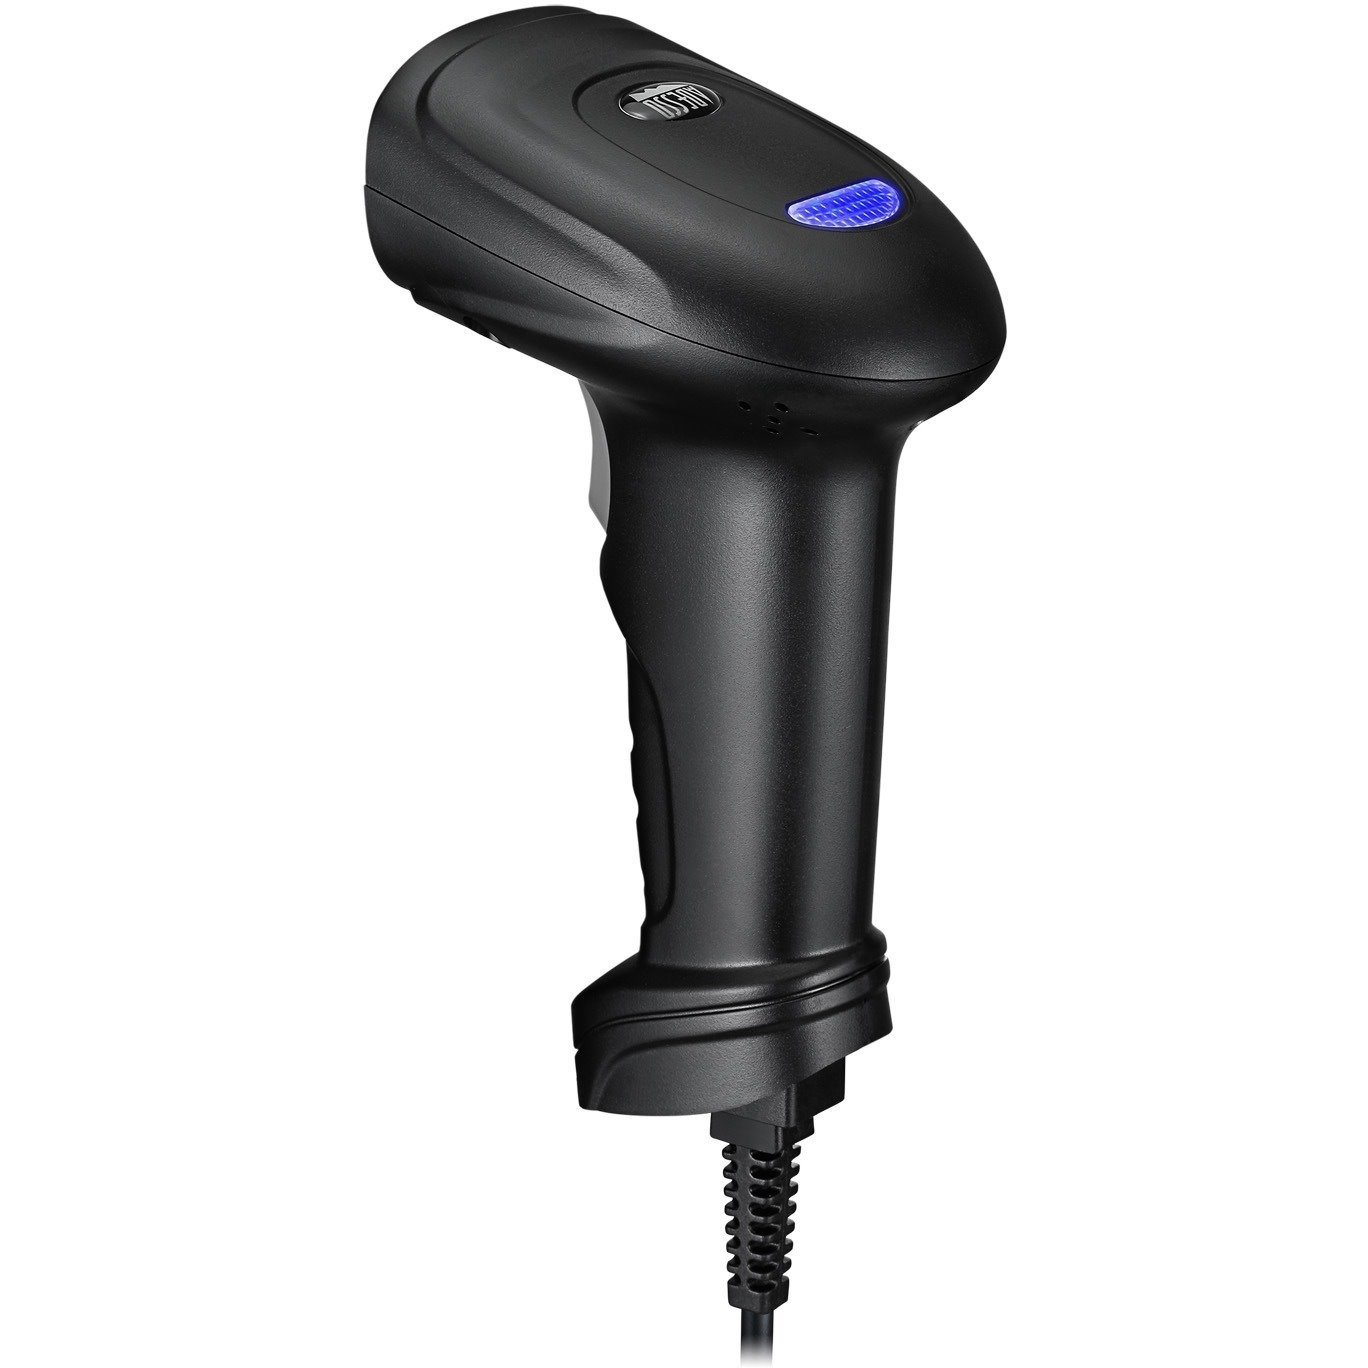 Adesso NuScan 1600U Healthcare, Warehouse Handheld Barcode Scanner - Cable Connectivity